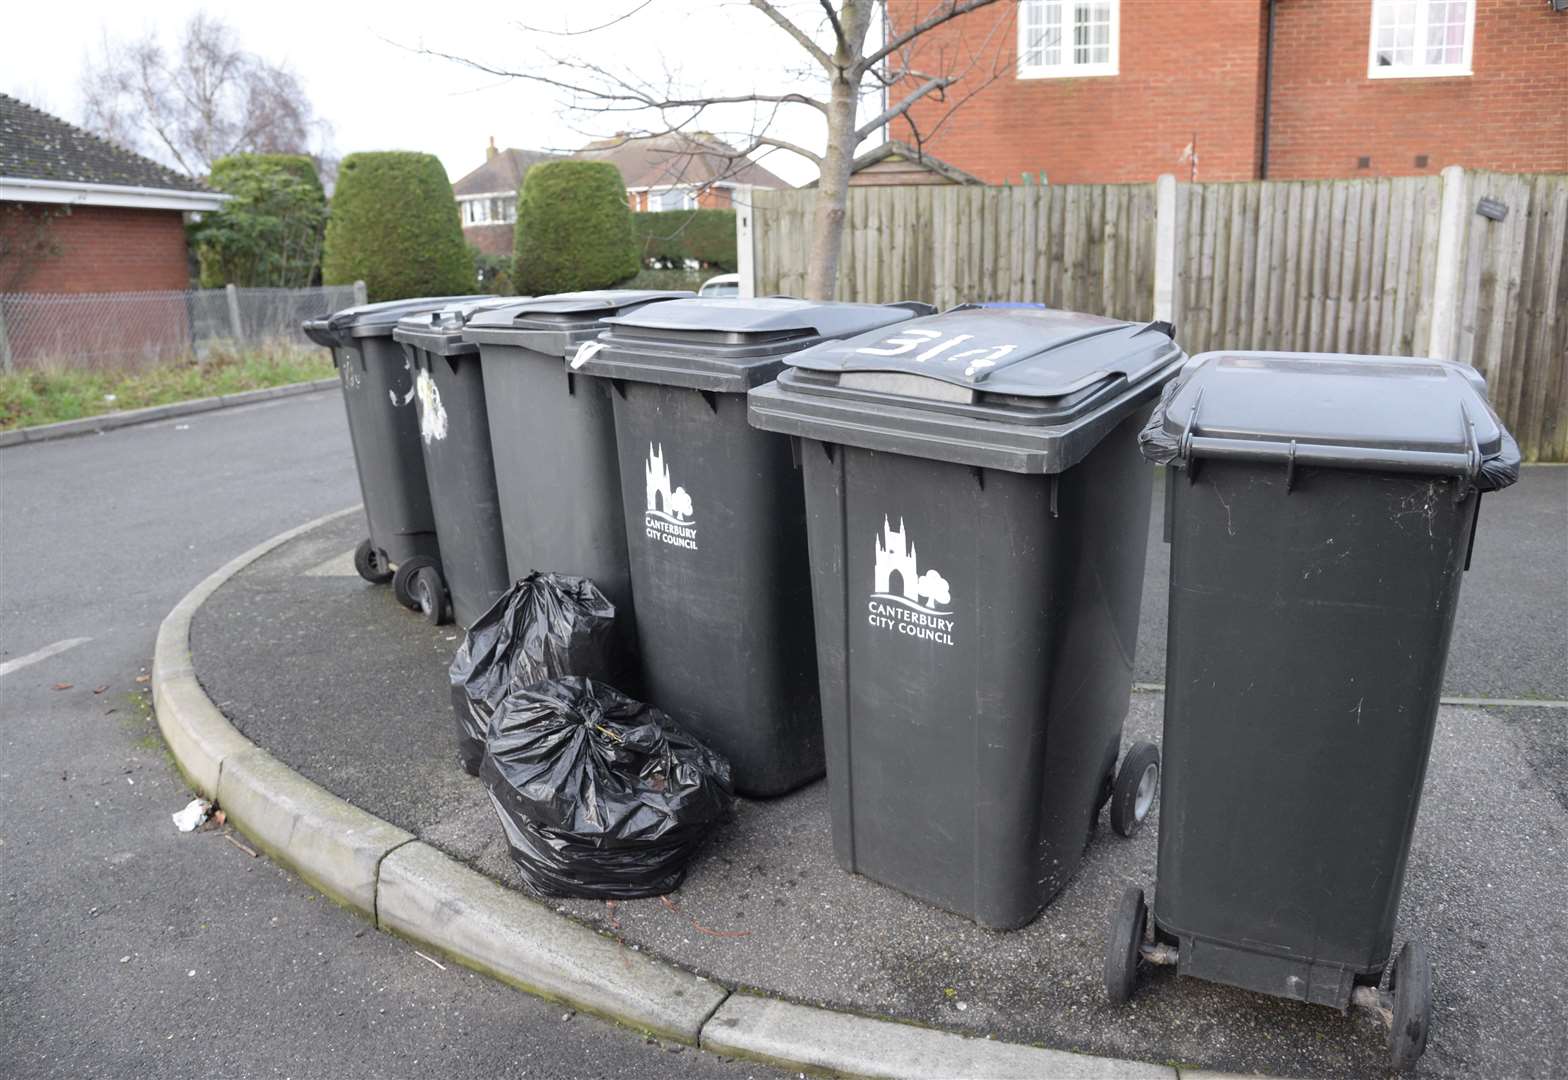 Bins could be uncollected in the Canterbury district. Picture: Chris Davey